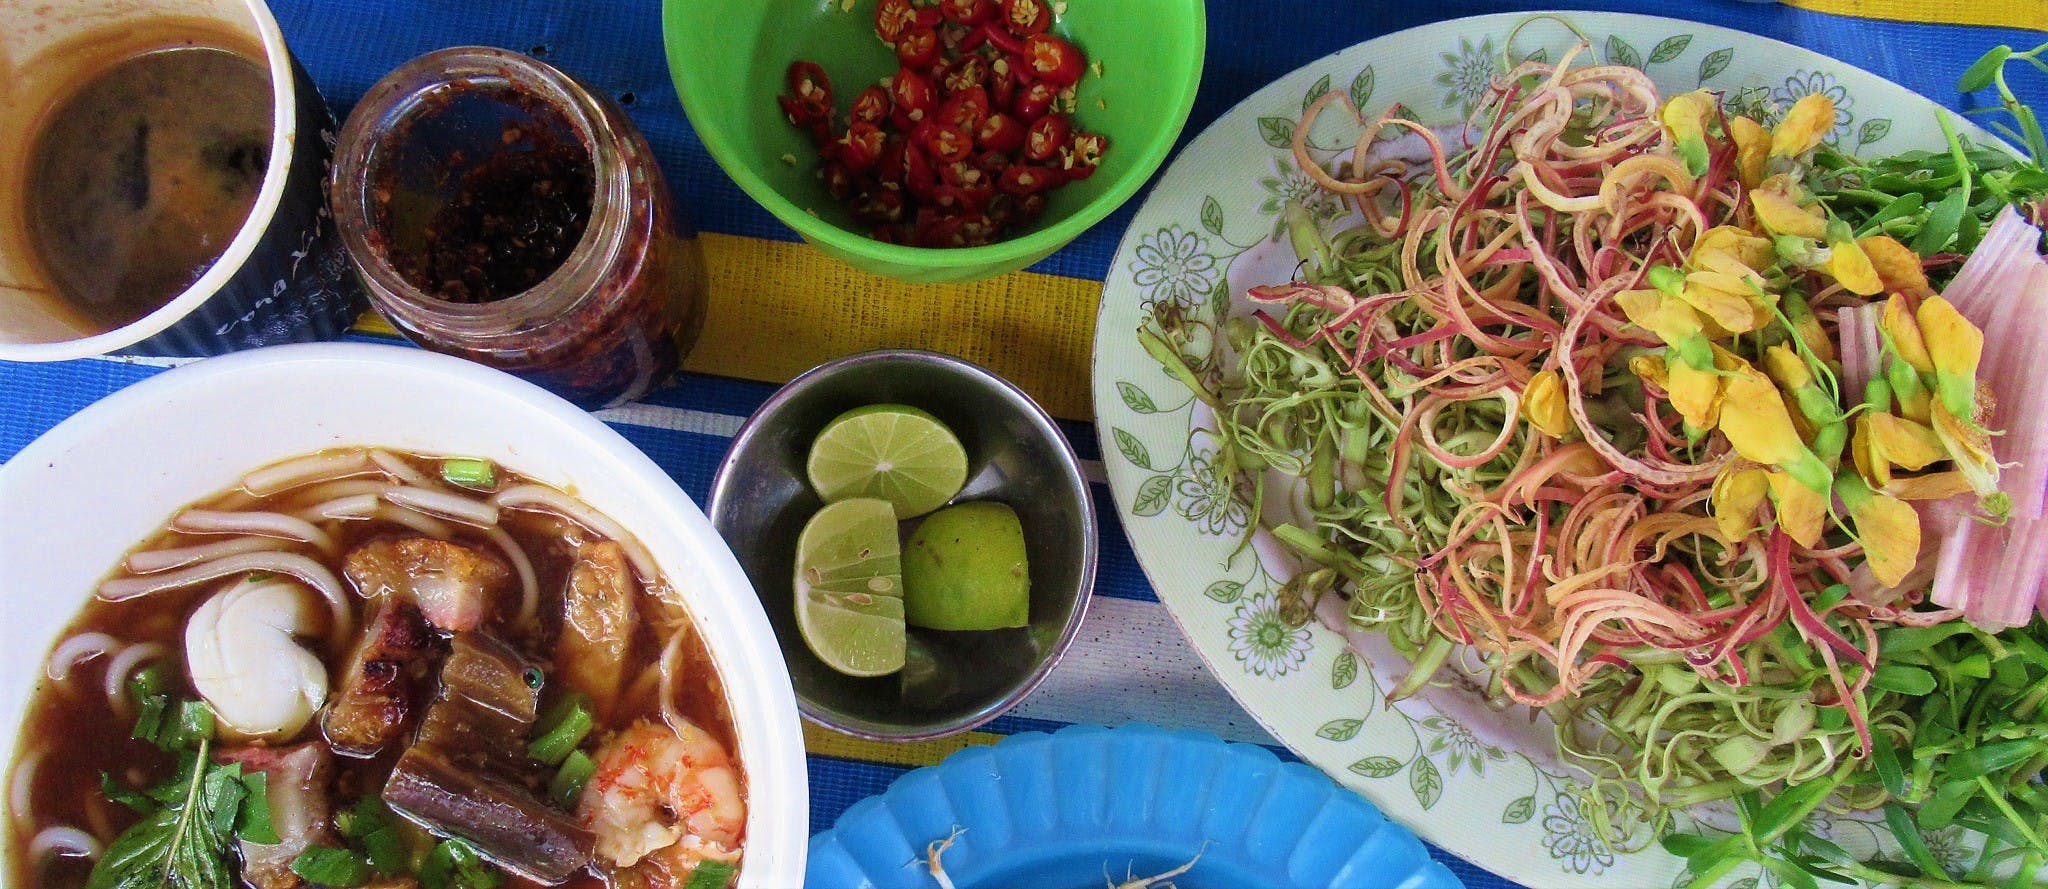 Food in the Time of Corona, Last Meals before Lock-Down, Vietnam